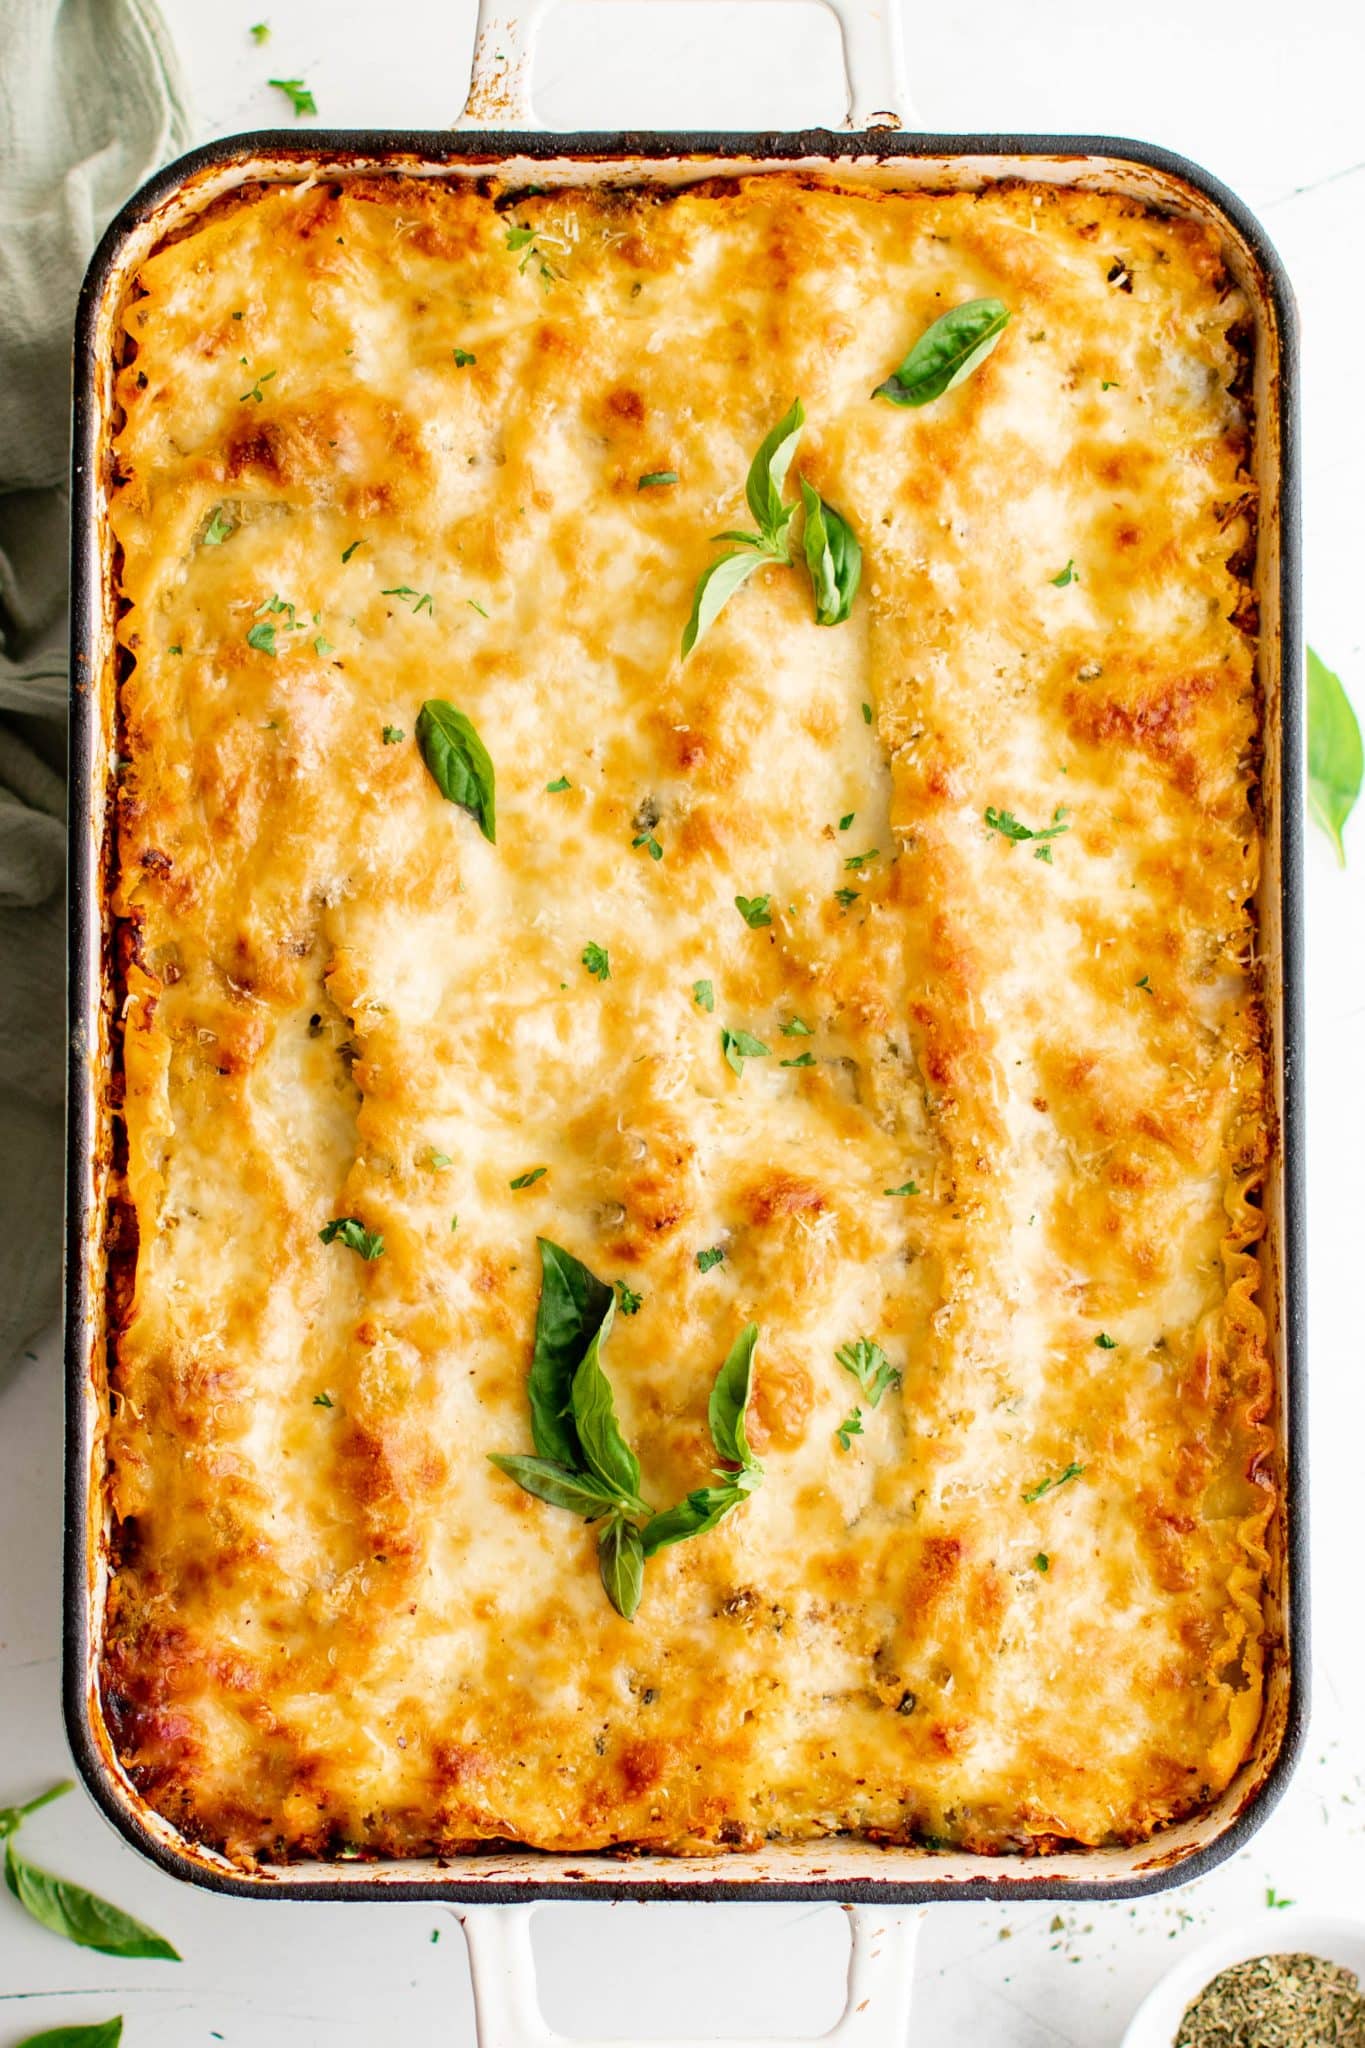 Large 9x13 baking dish filled with cheesy, golden, and bubbly homemade lasagna garnished with fresh basil leaves.